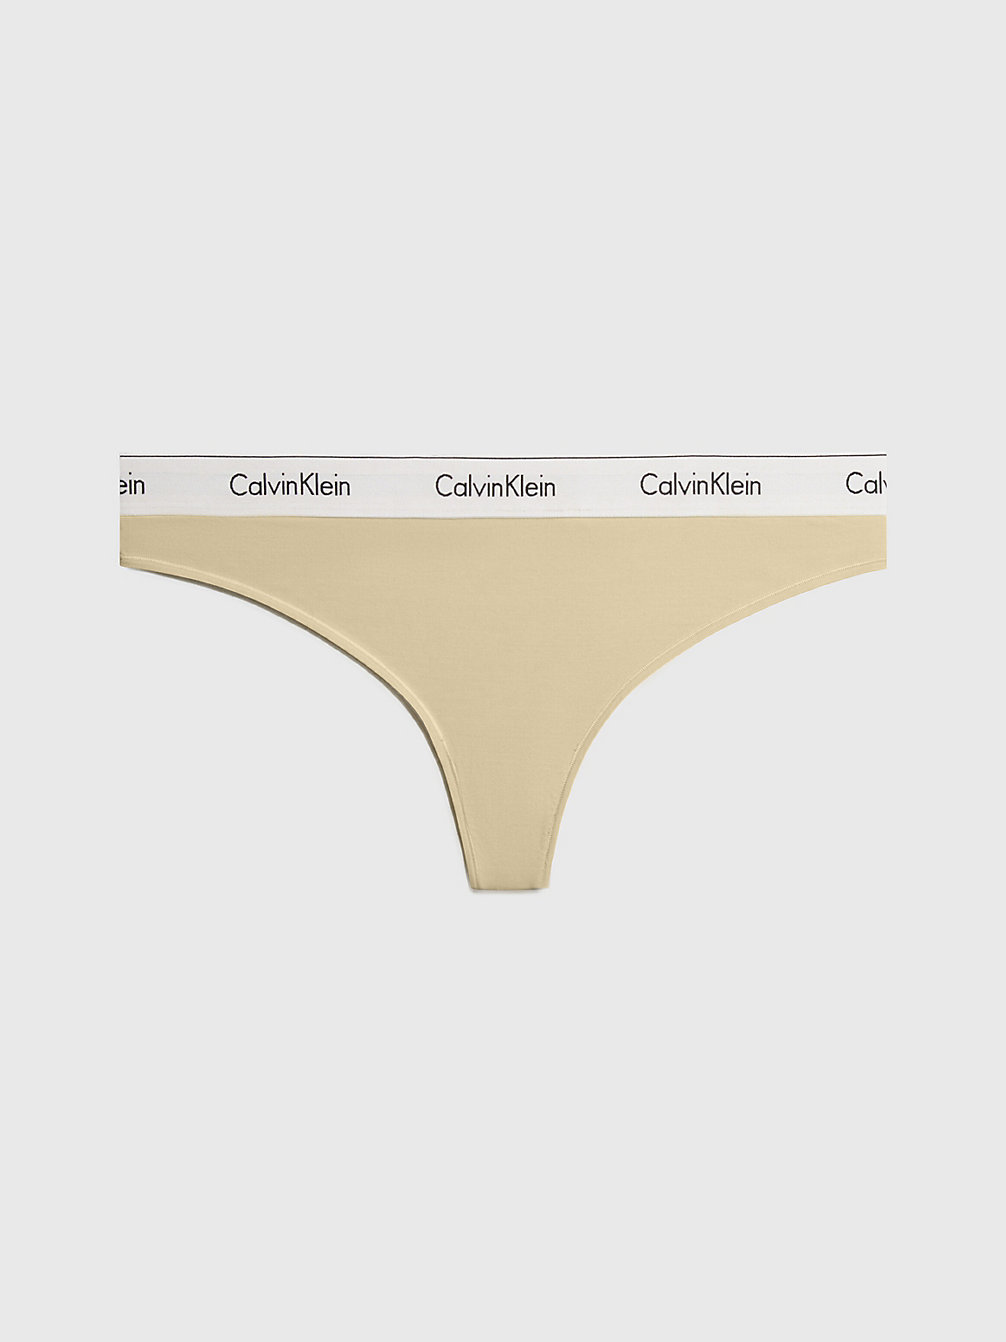 SHELL > Grote Maat String - Modern Cotton > undefined dames - Calvin Klein